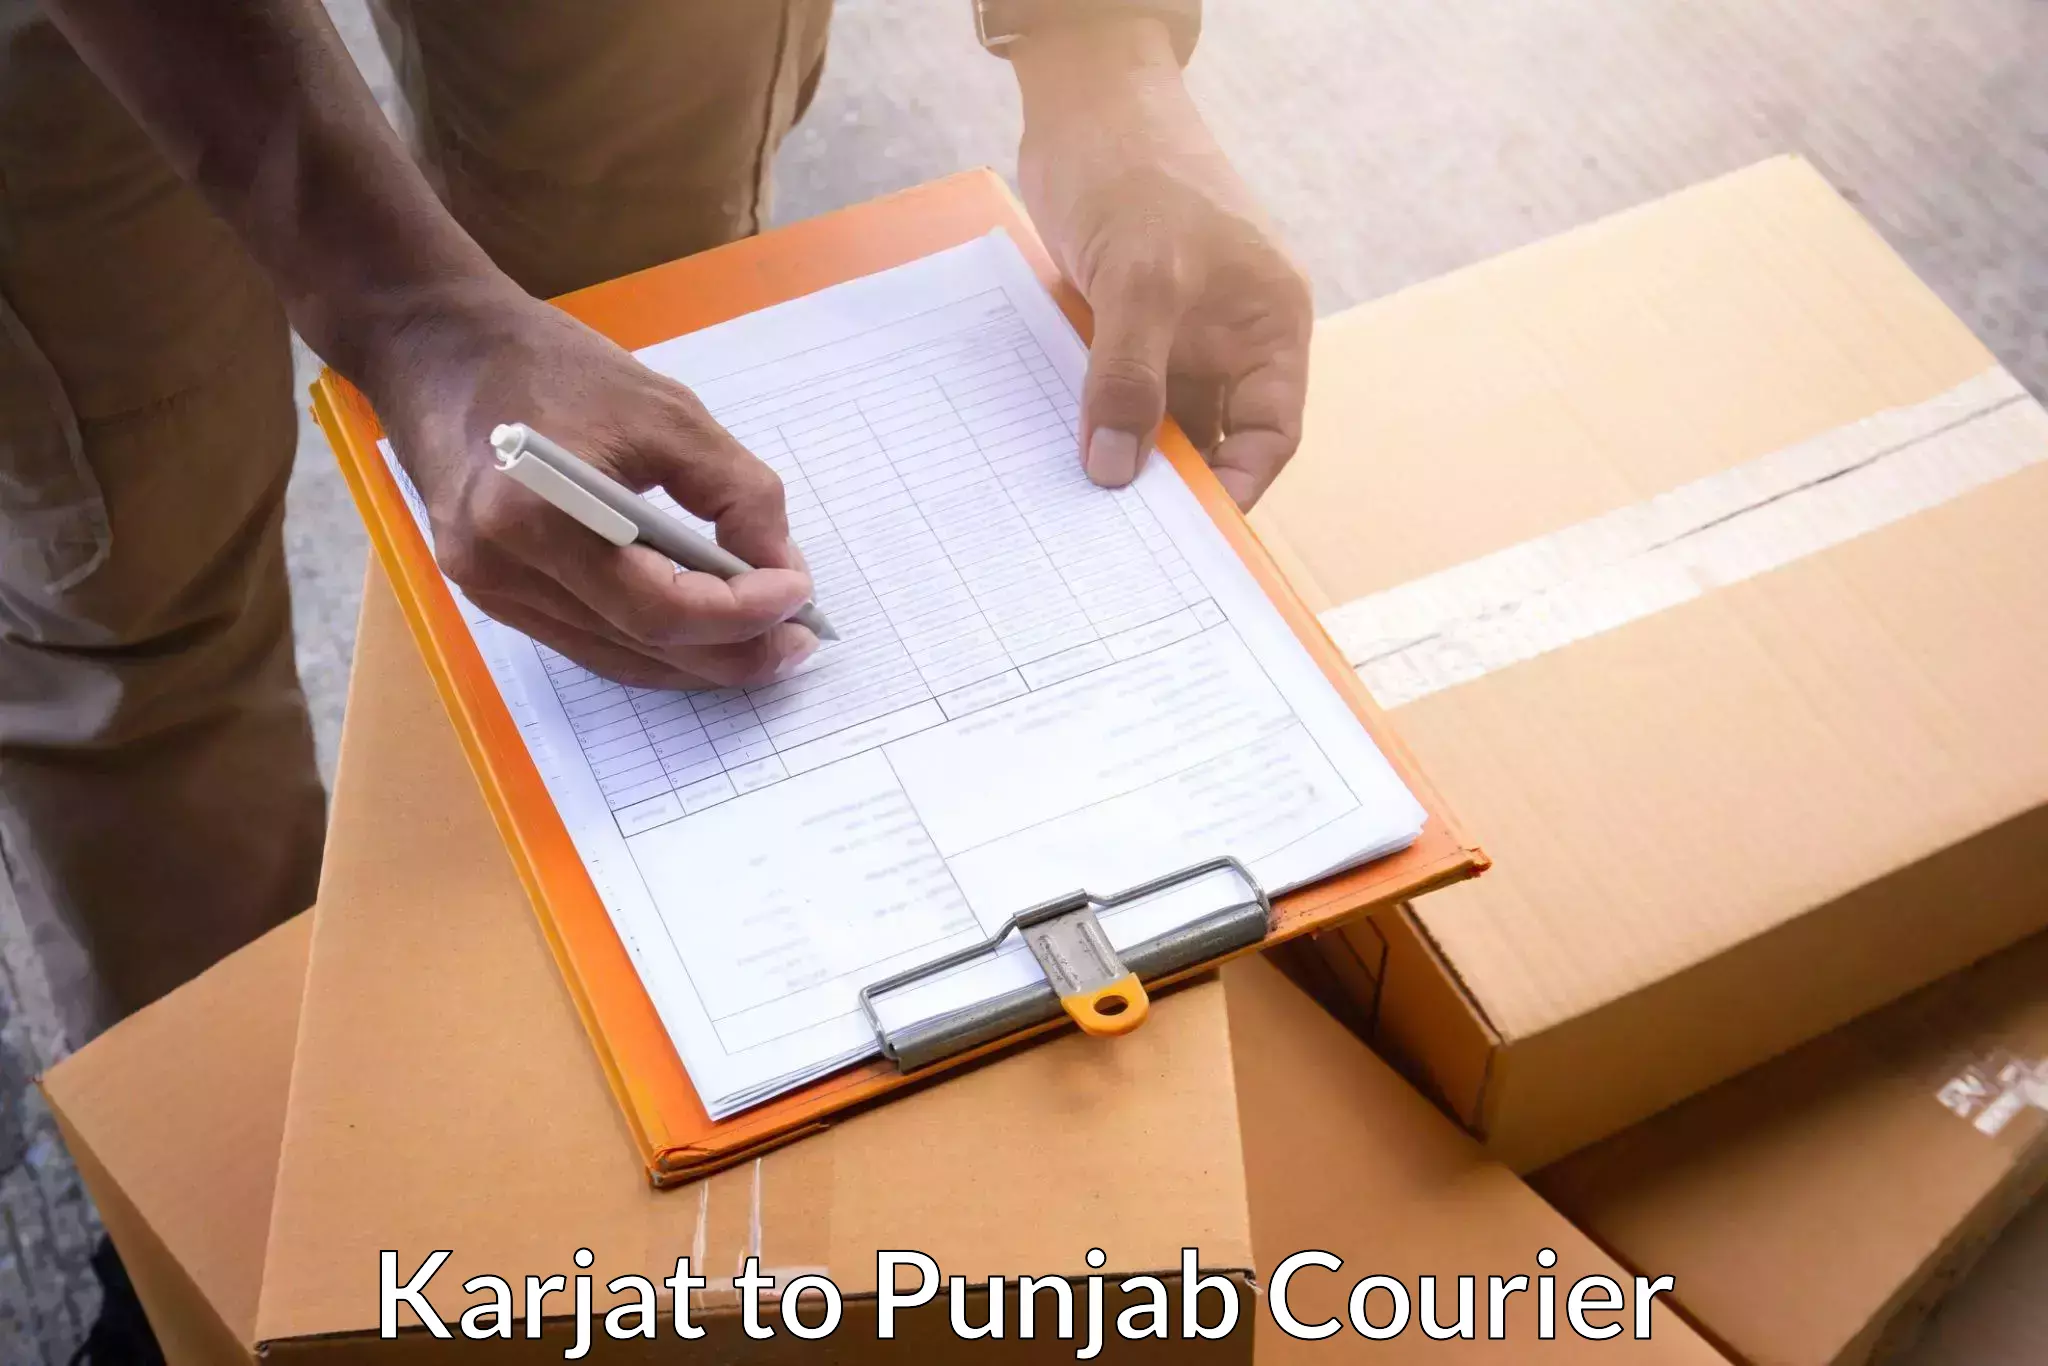 Courier service innovation Karjat to Firozpur